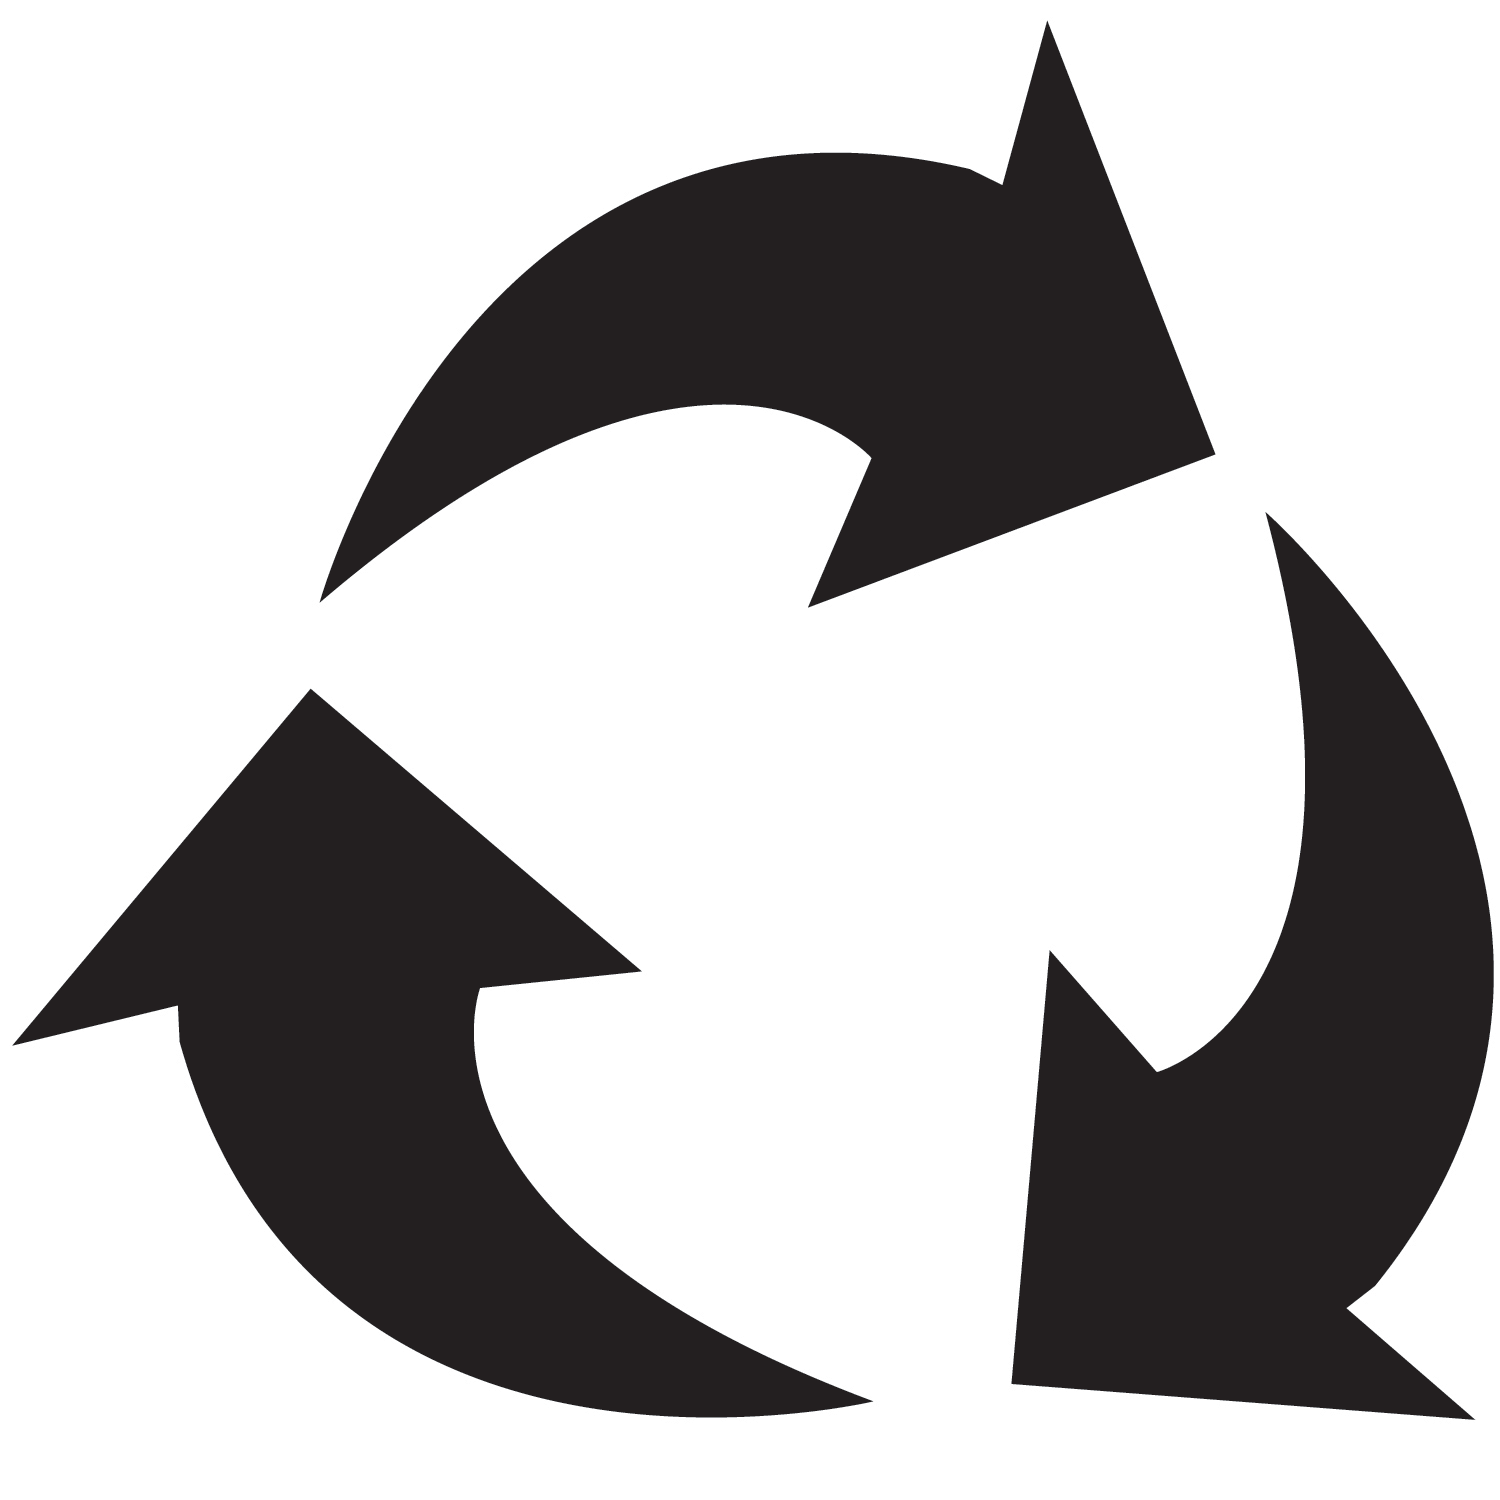 Recycling Symbols Printable - ClipArt Best